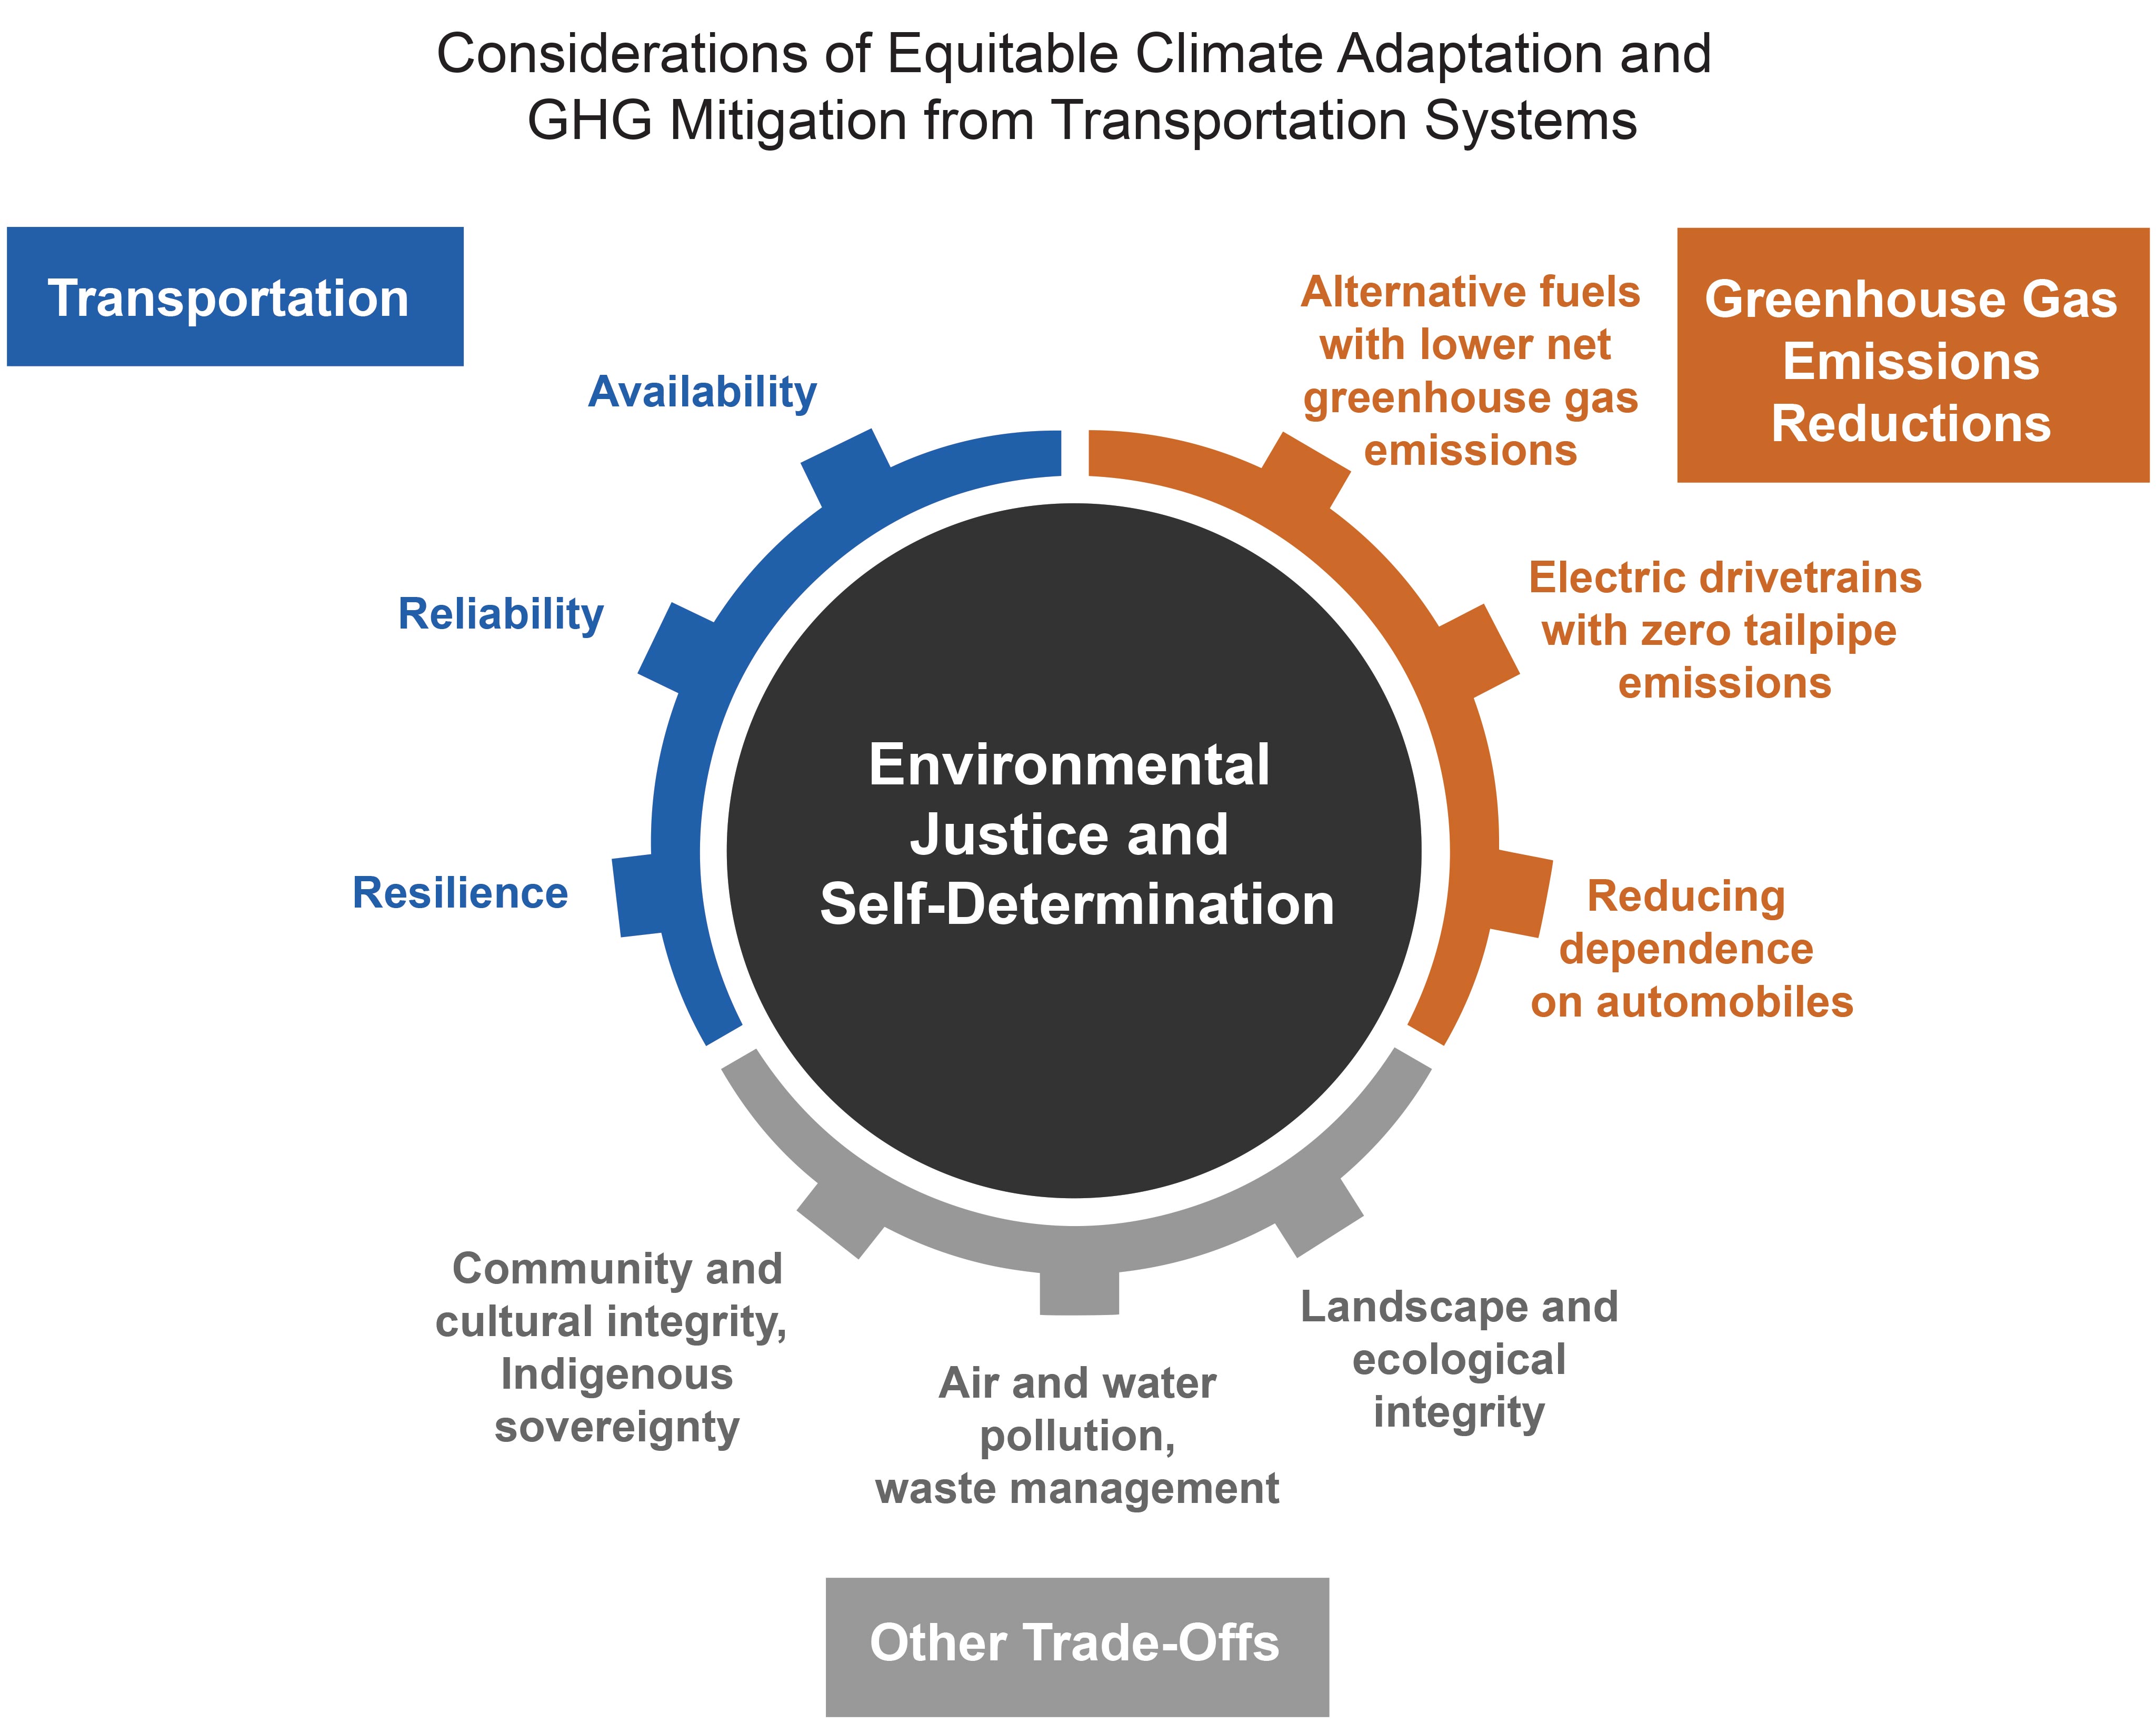 Considerations of Equitable Climate Adaptation and GHG Mitigation from Transportation Systems